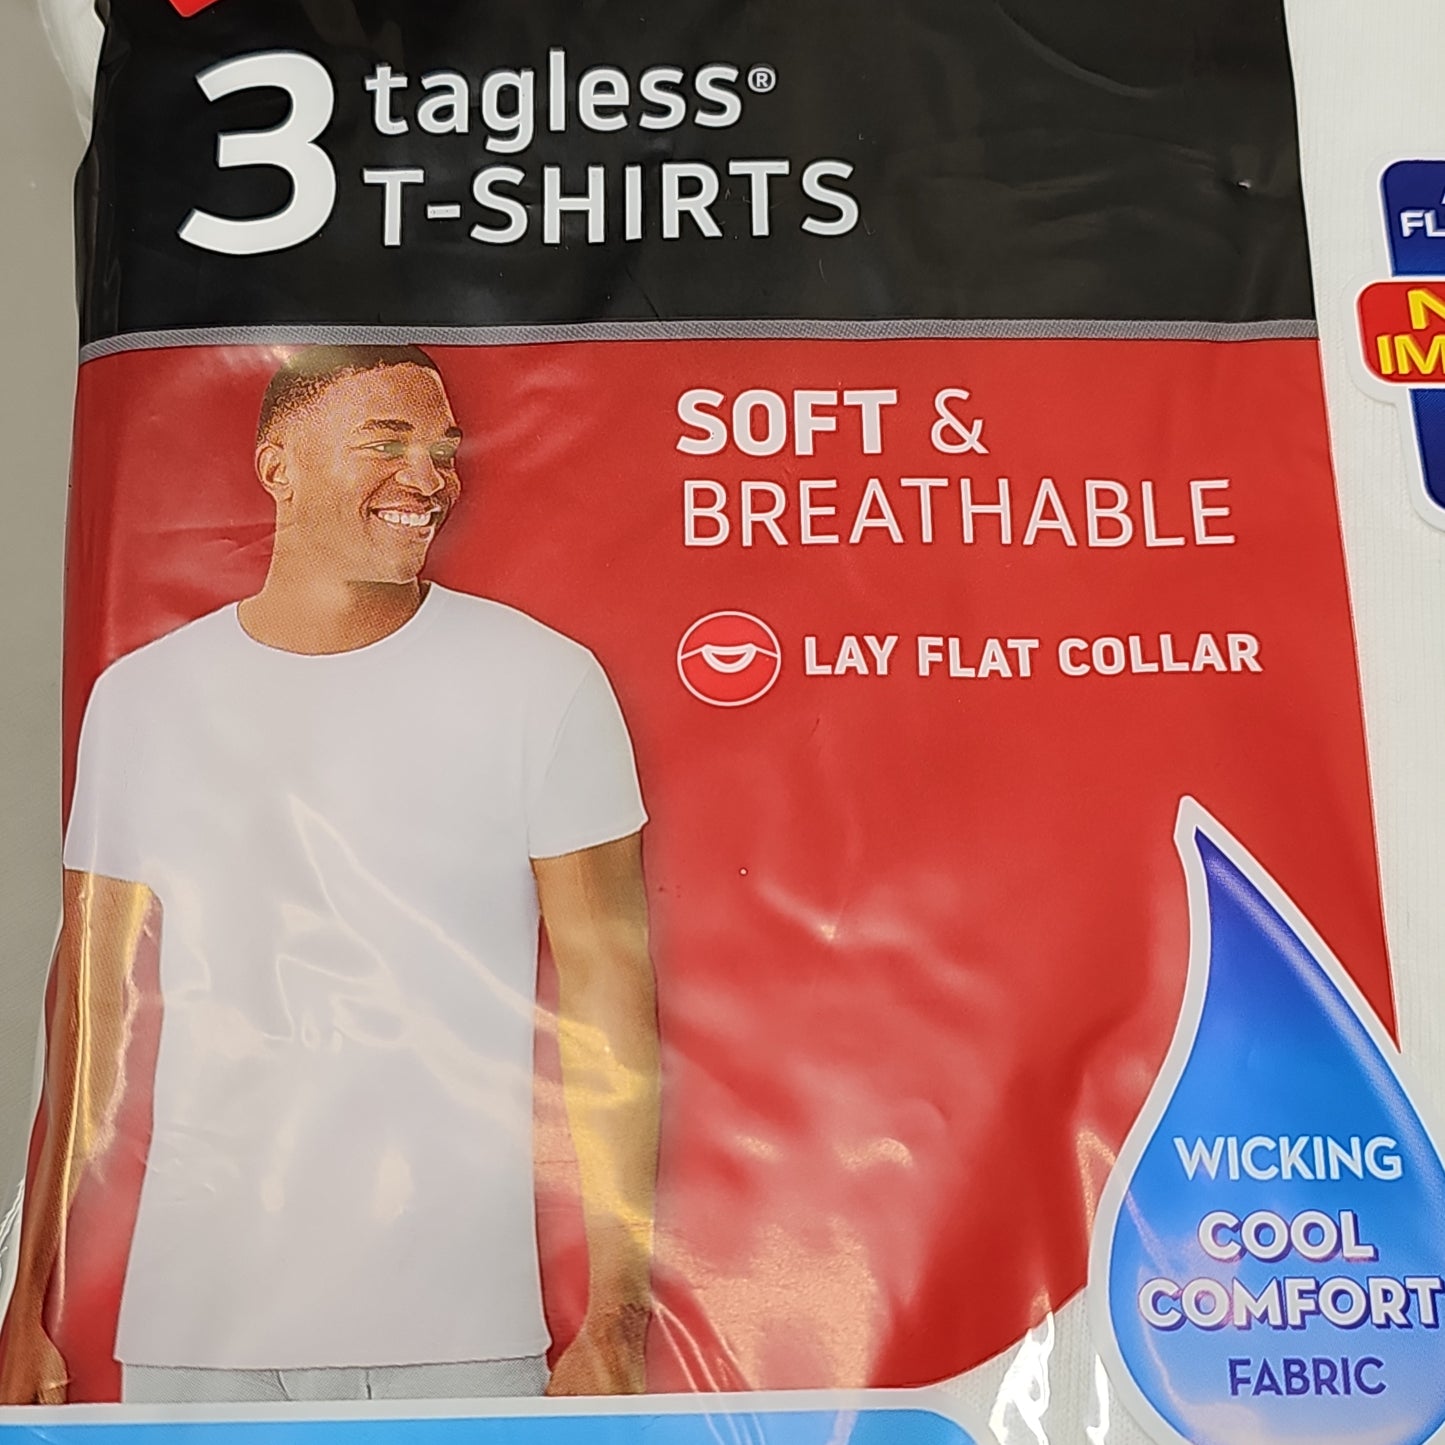 HANES Tagless T-Shirts Pack of 3 Men's Size M 38-40" White #2135 (New)